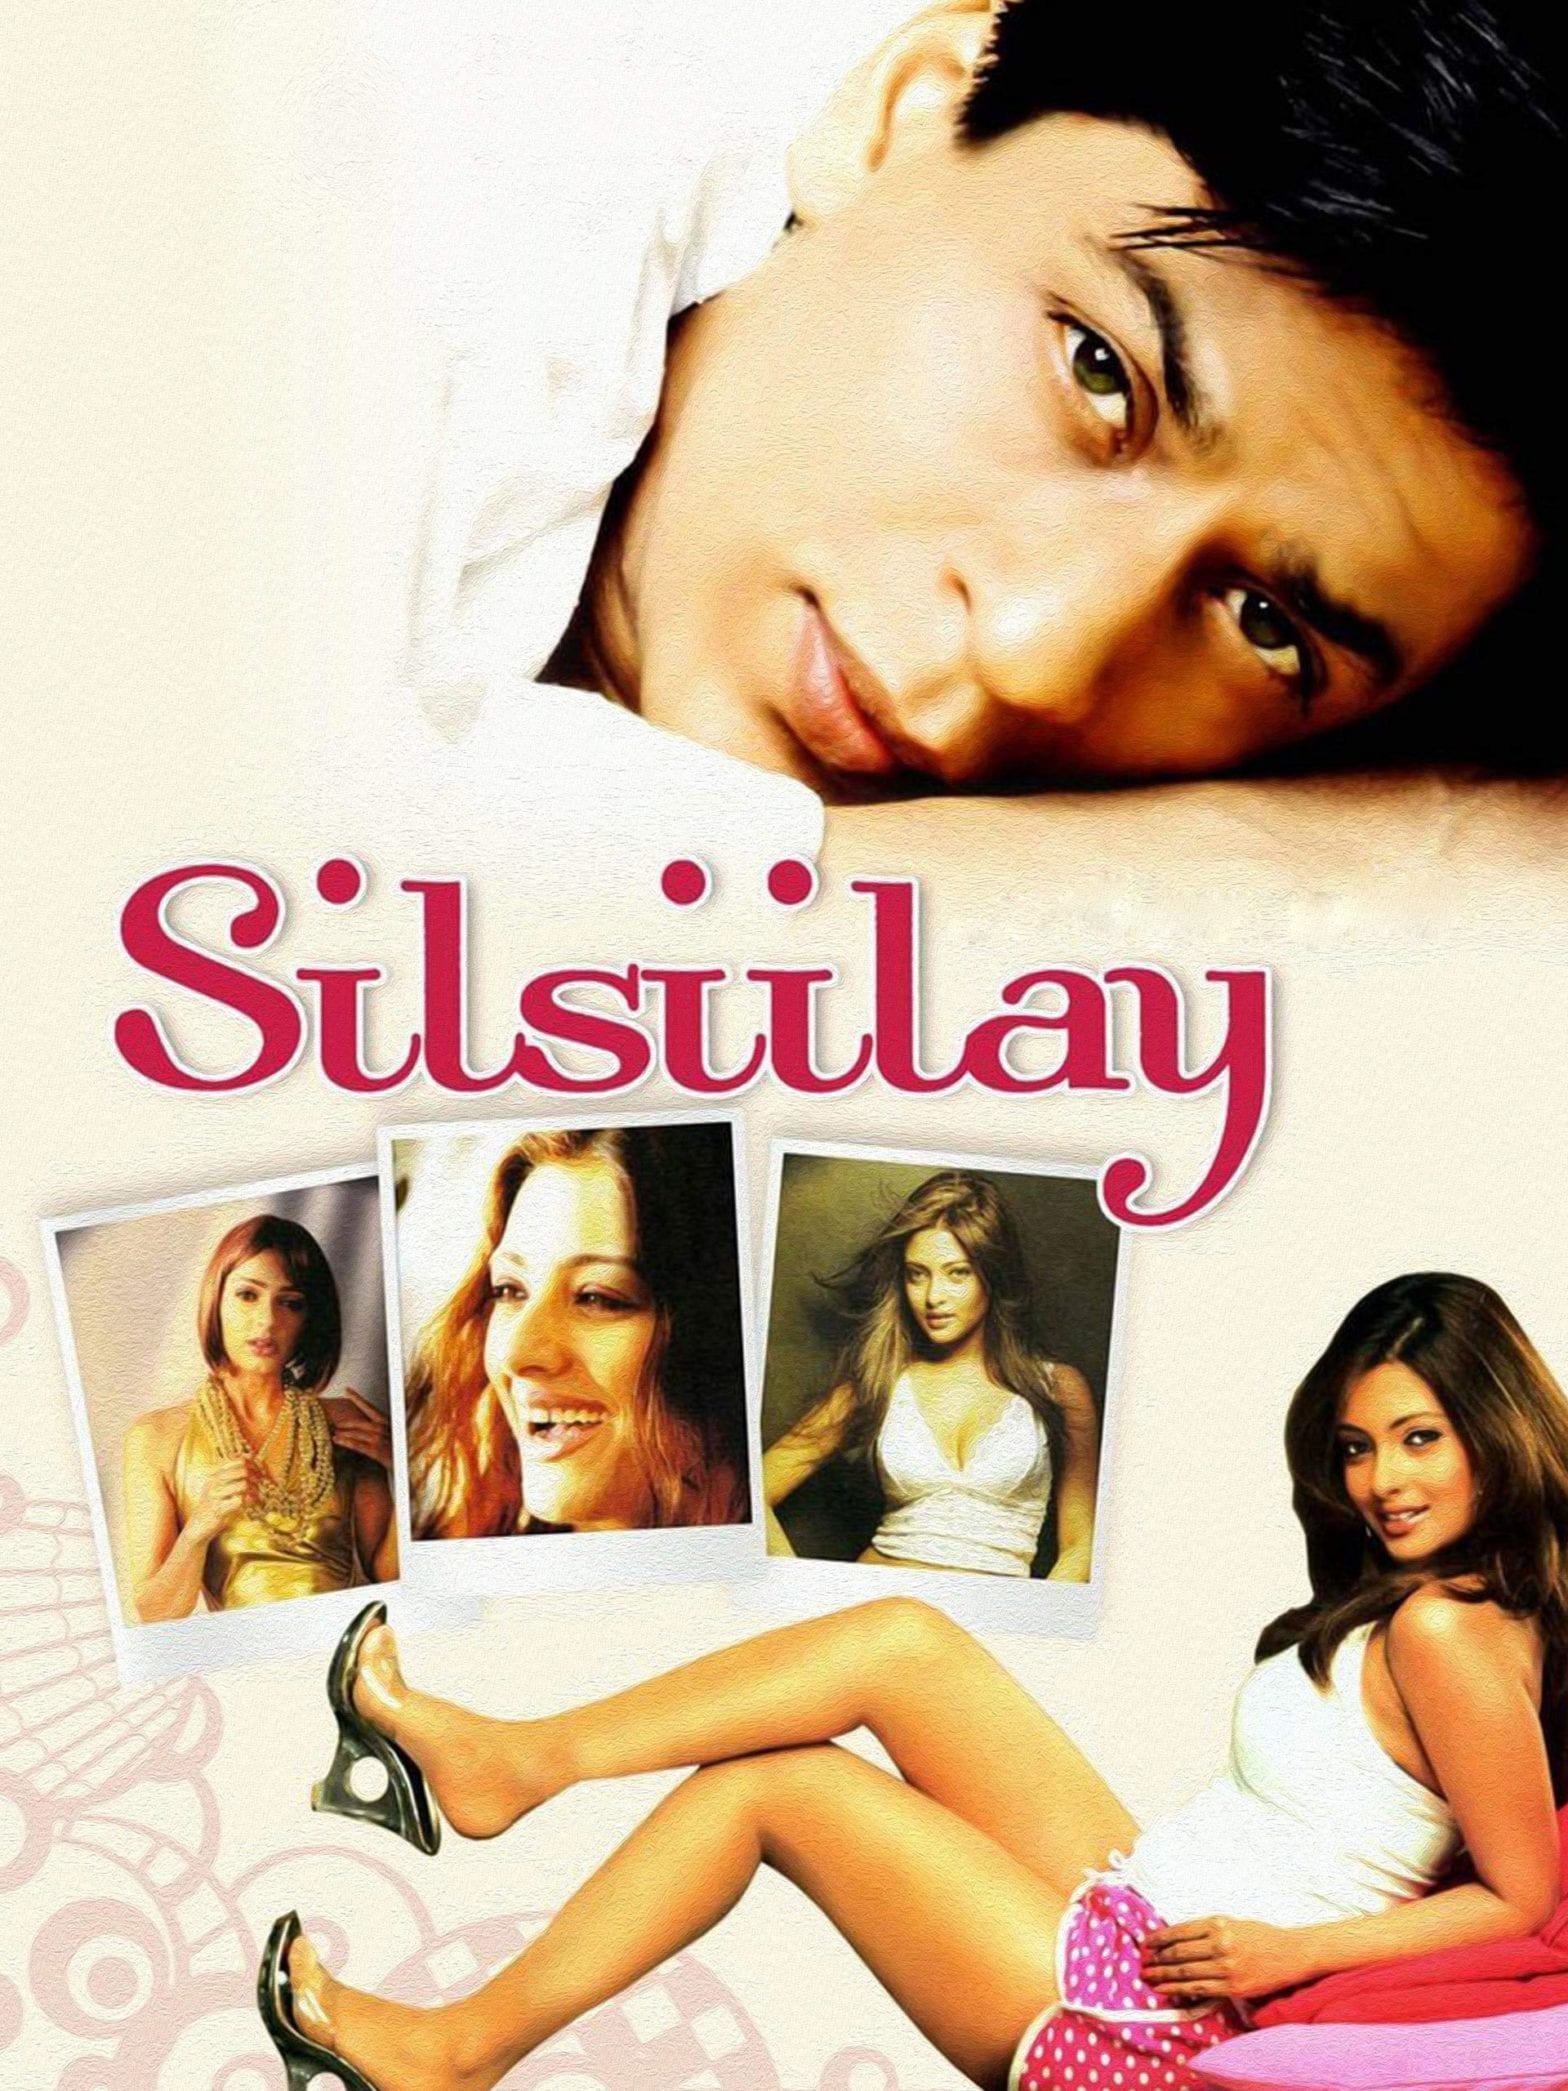 Poster for the movie "Silsiilay"